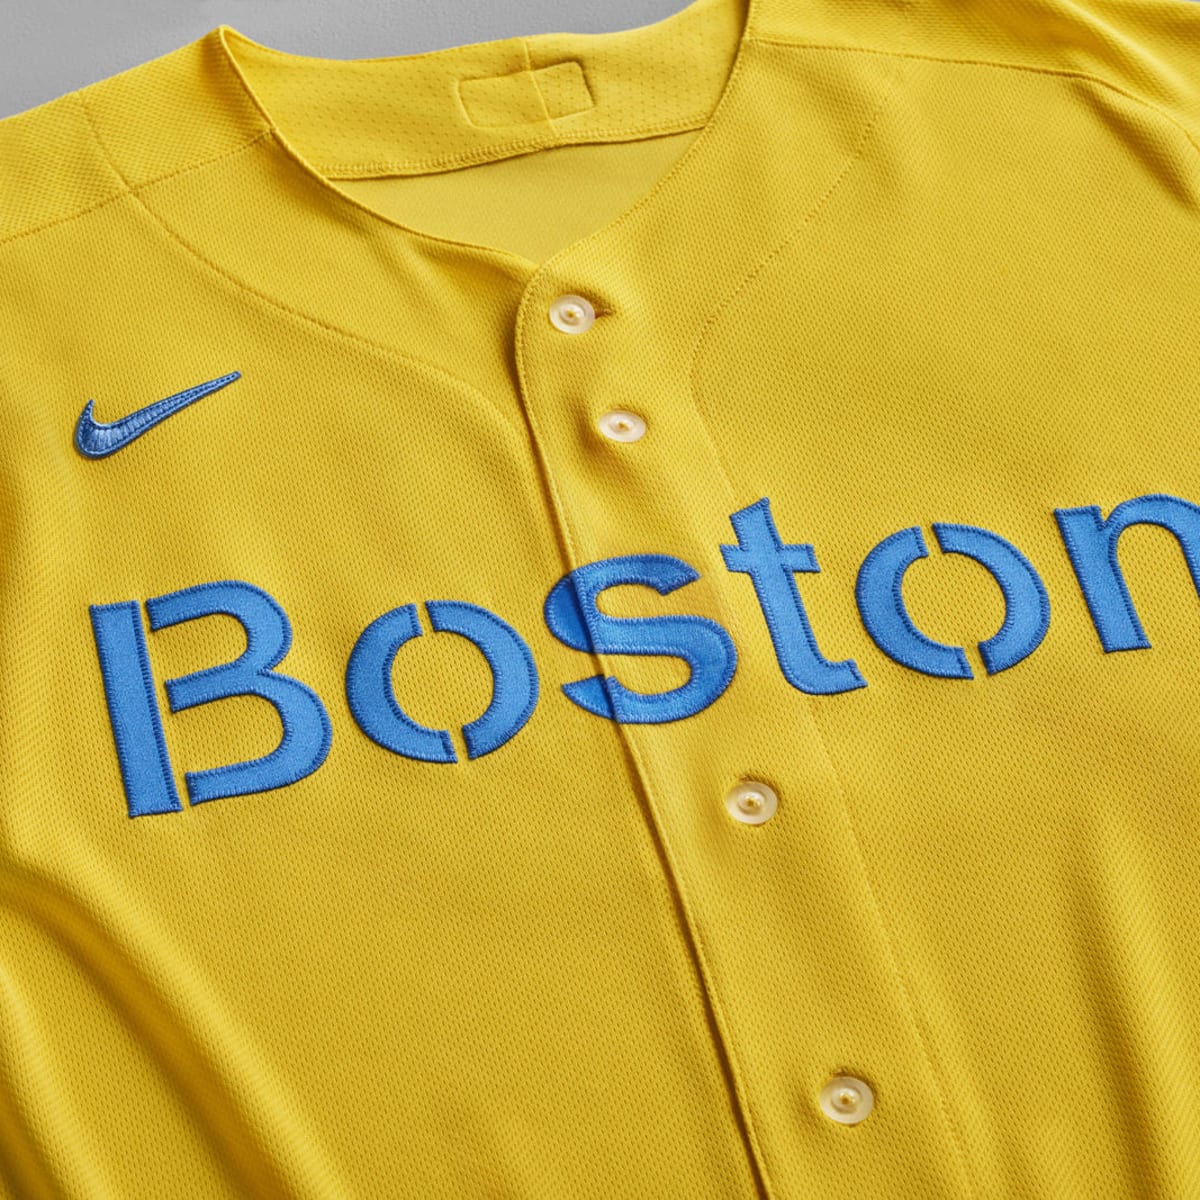 Nike Launches City Connect Series with Inspiring Boston Red Sox Jersey - En  Fuego